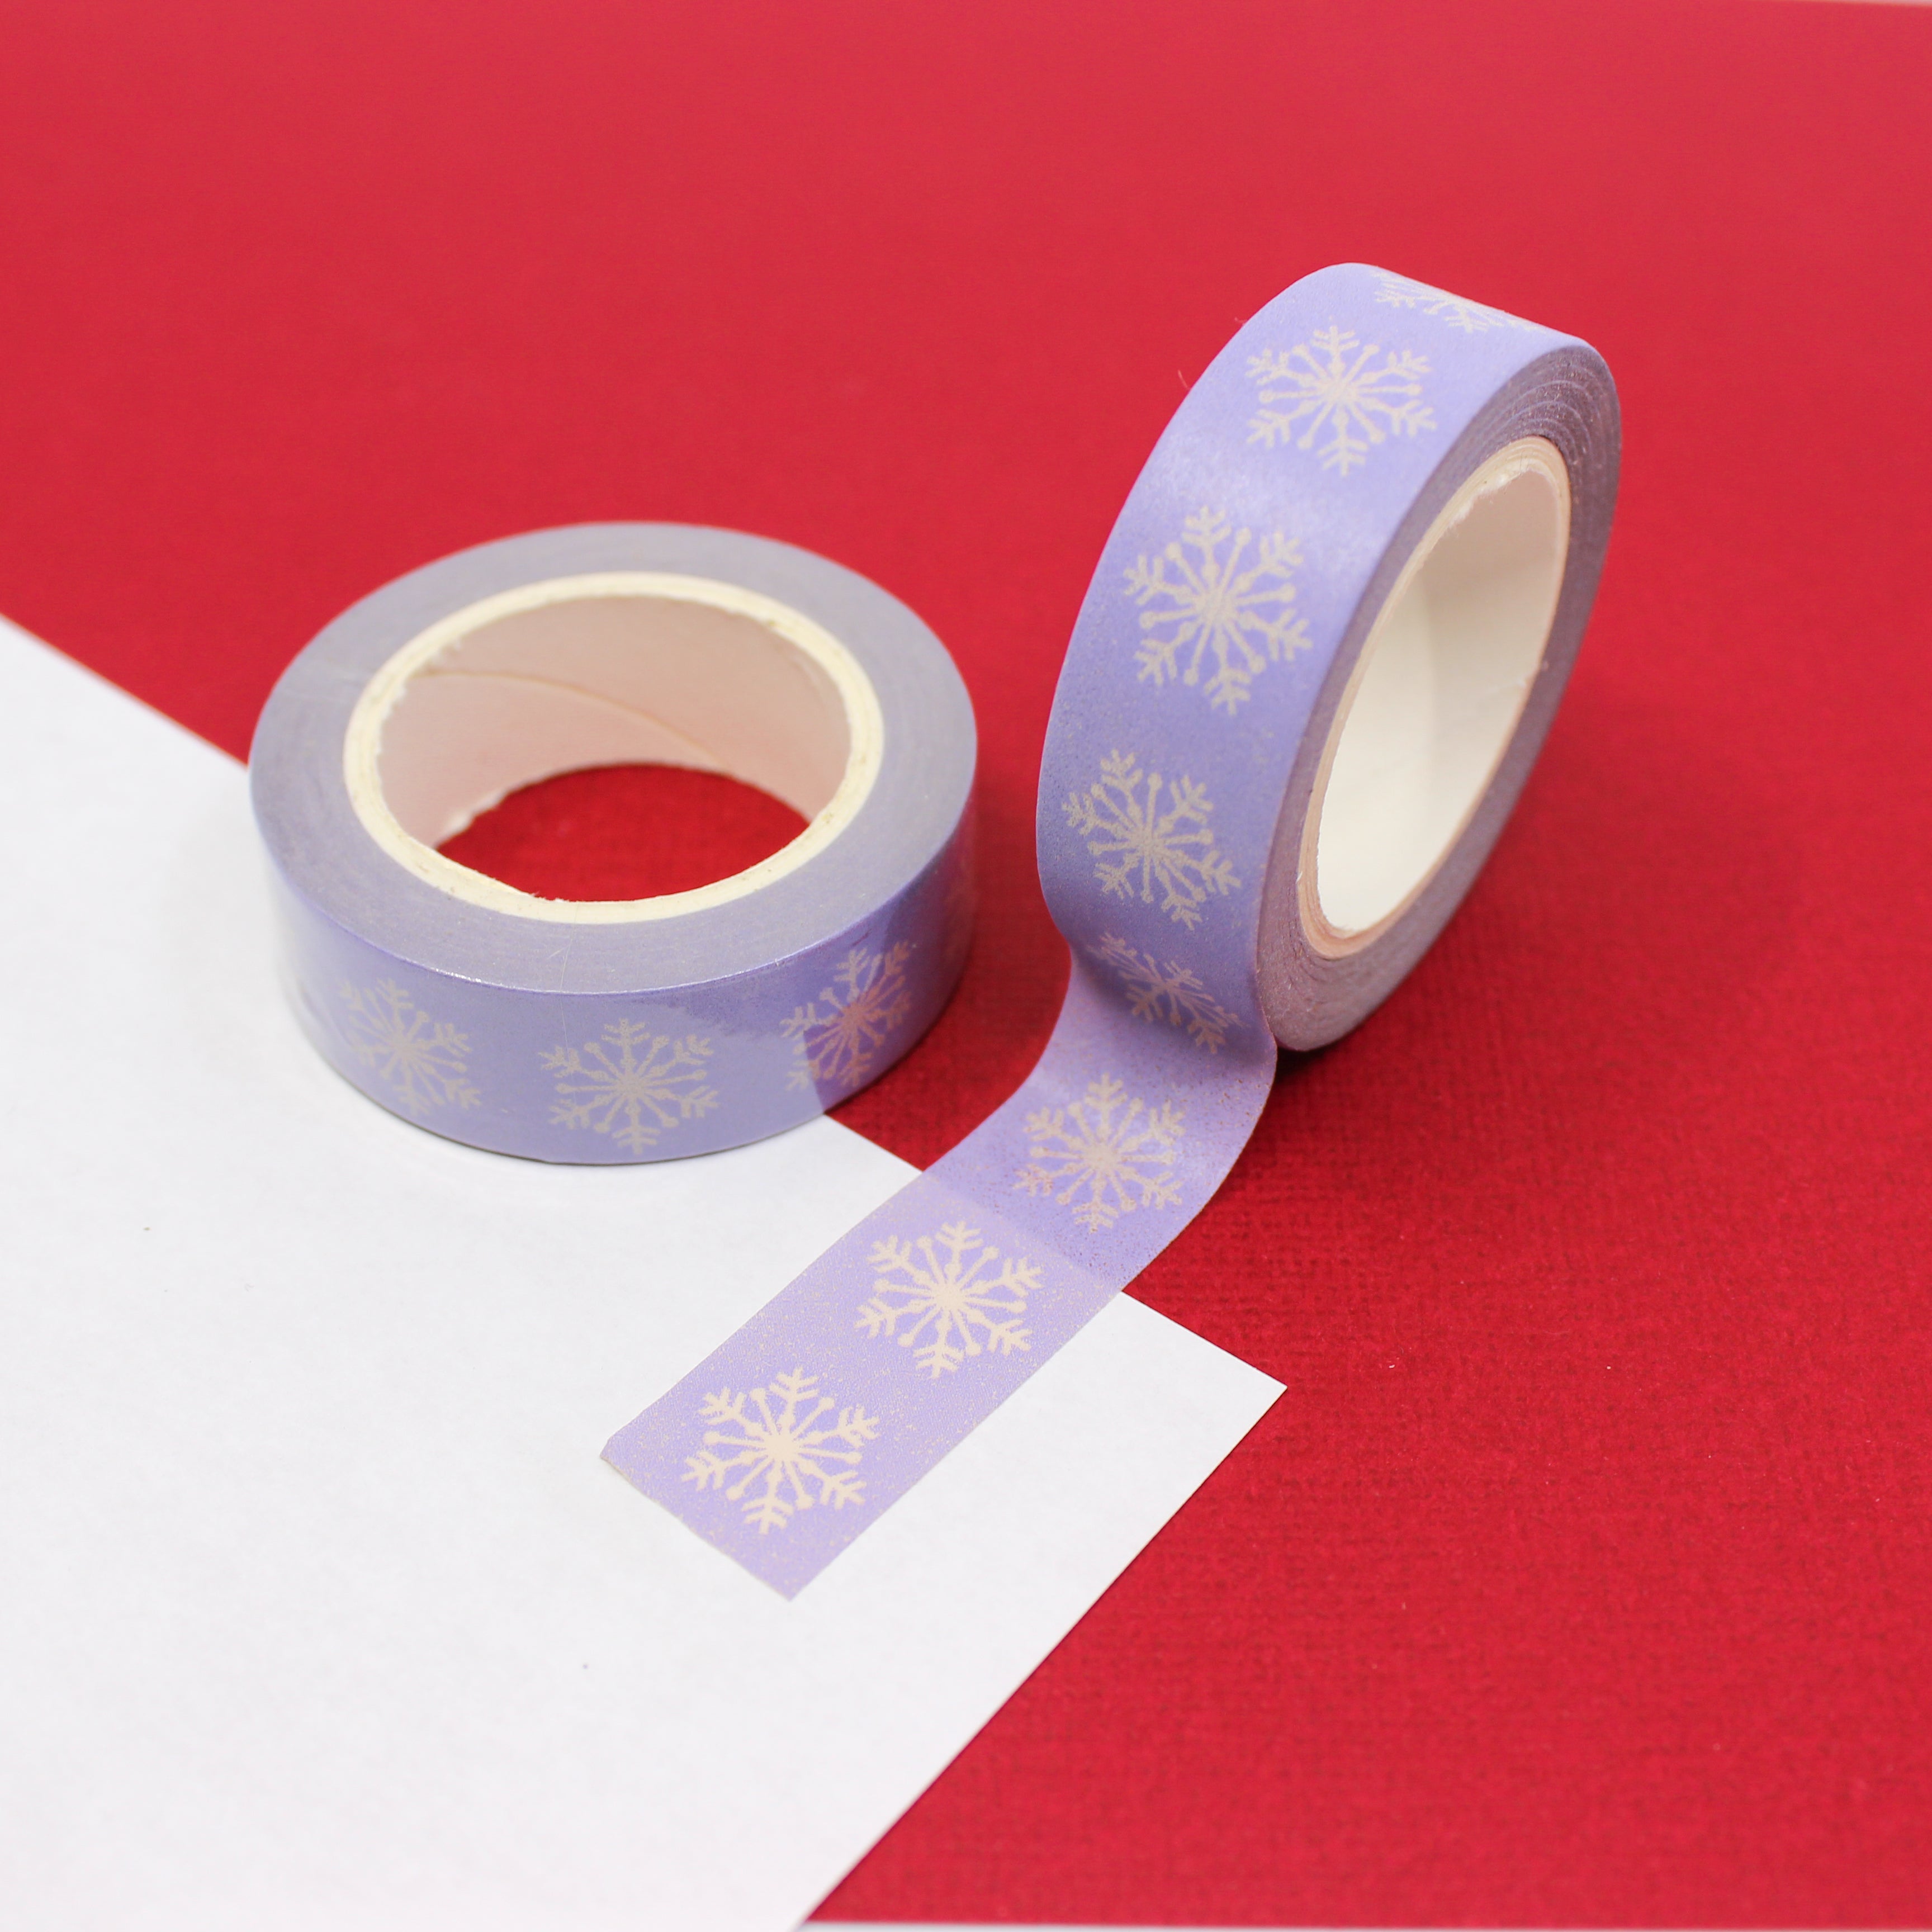 This photo is of our unique winter color of lavender purple snowflake, if you are looking for an option that is not traditional red and green for your Christmas projects. This tape is sold at BBB Supplies Craft Shop.